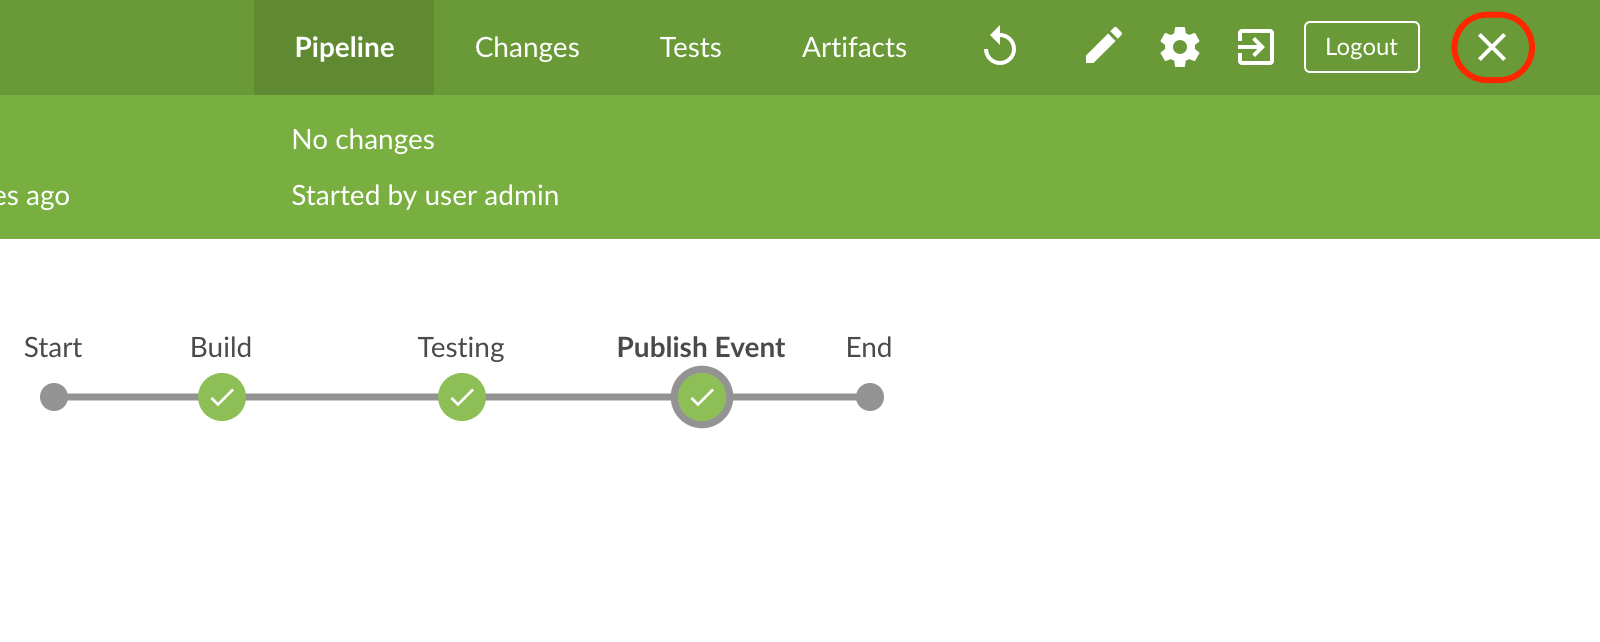 Closing the Pipeline status page